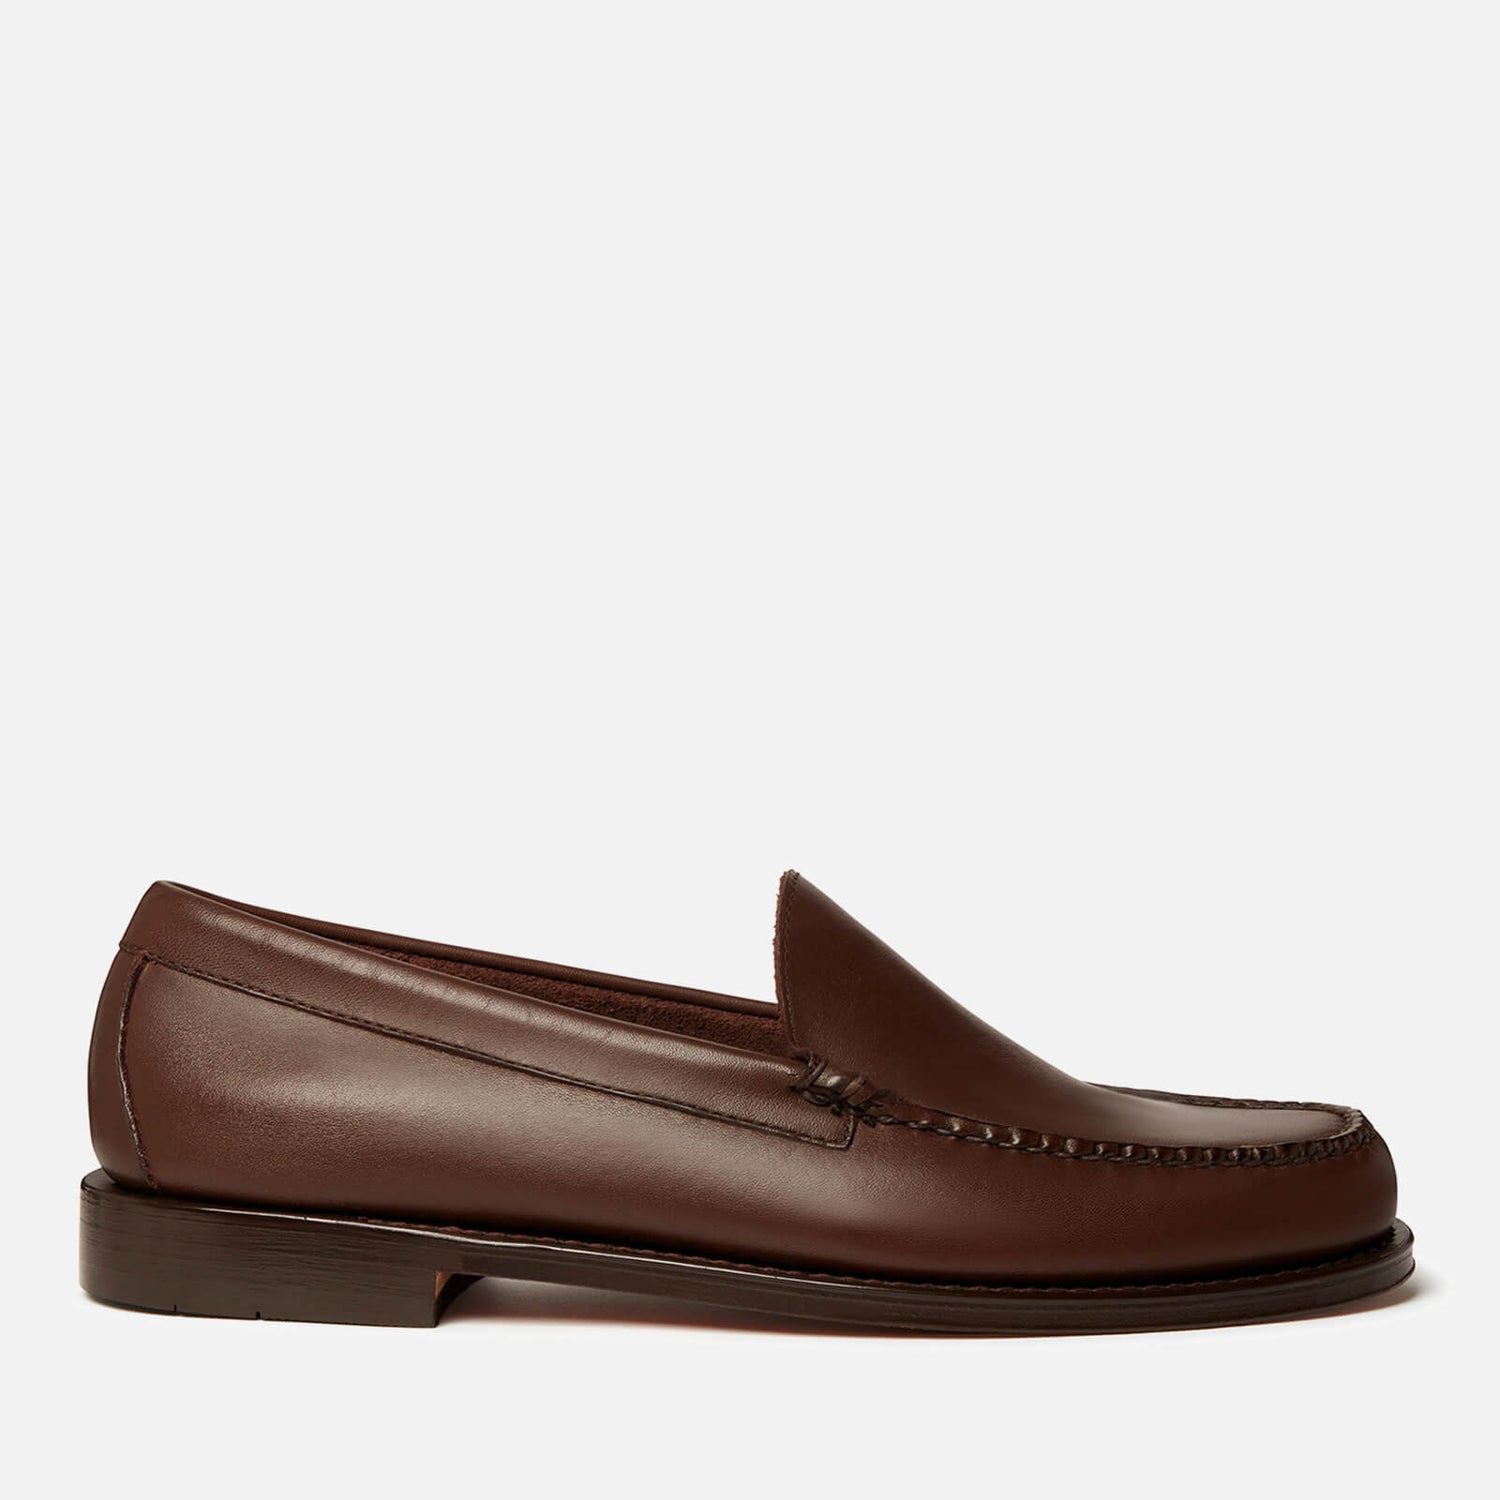 G.H Bass Men's Venetian Leather Loafers - UK 8